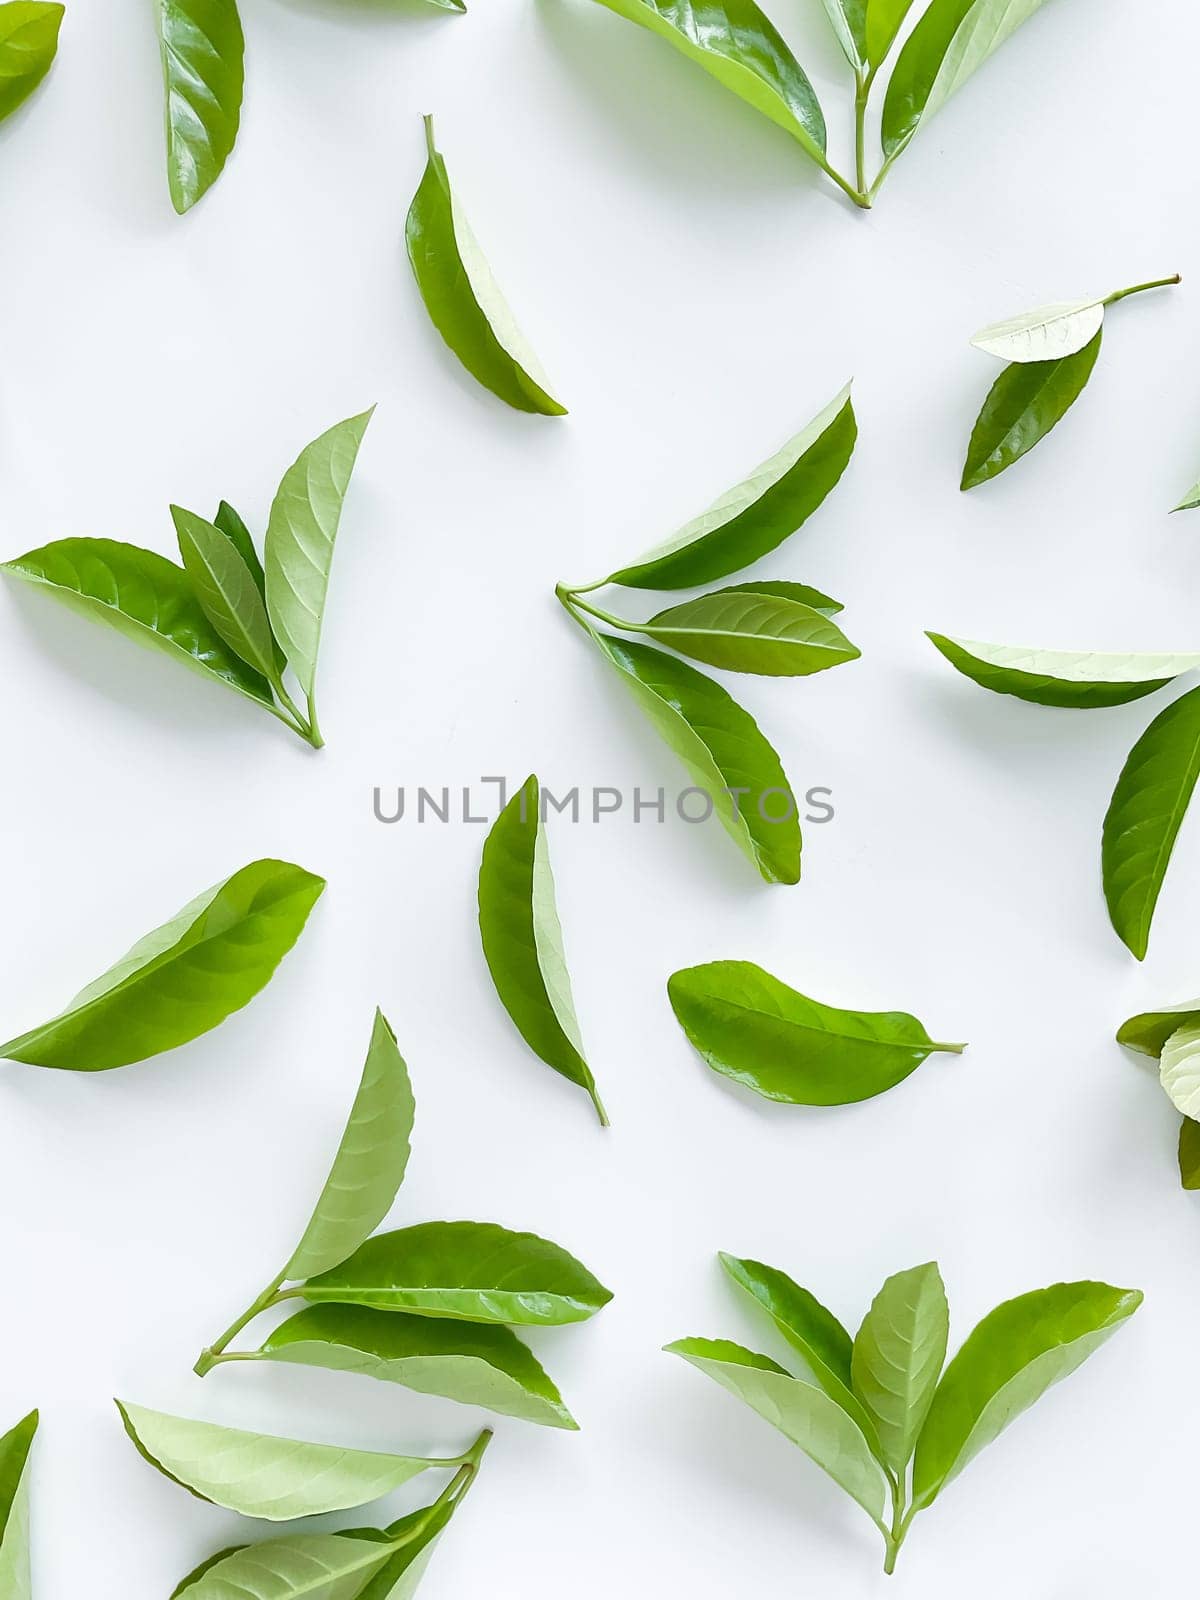 green leaves on a white background. Large fresh decorative leaves. High quality photo